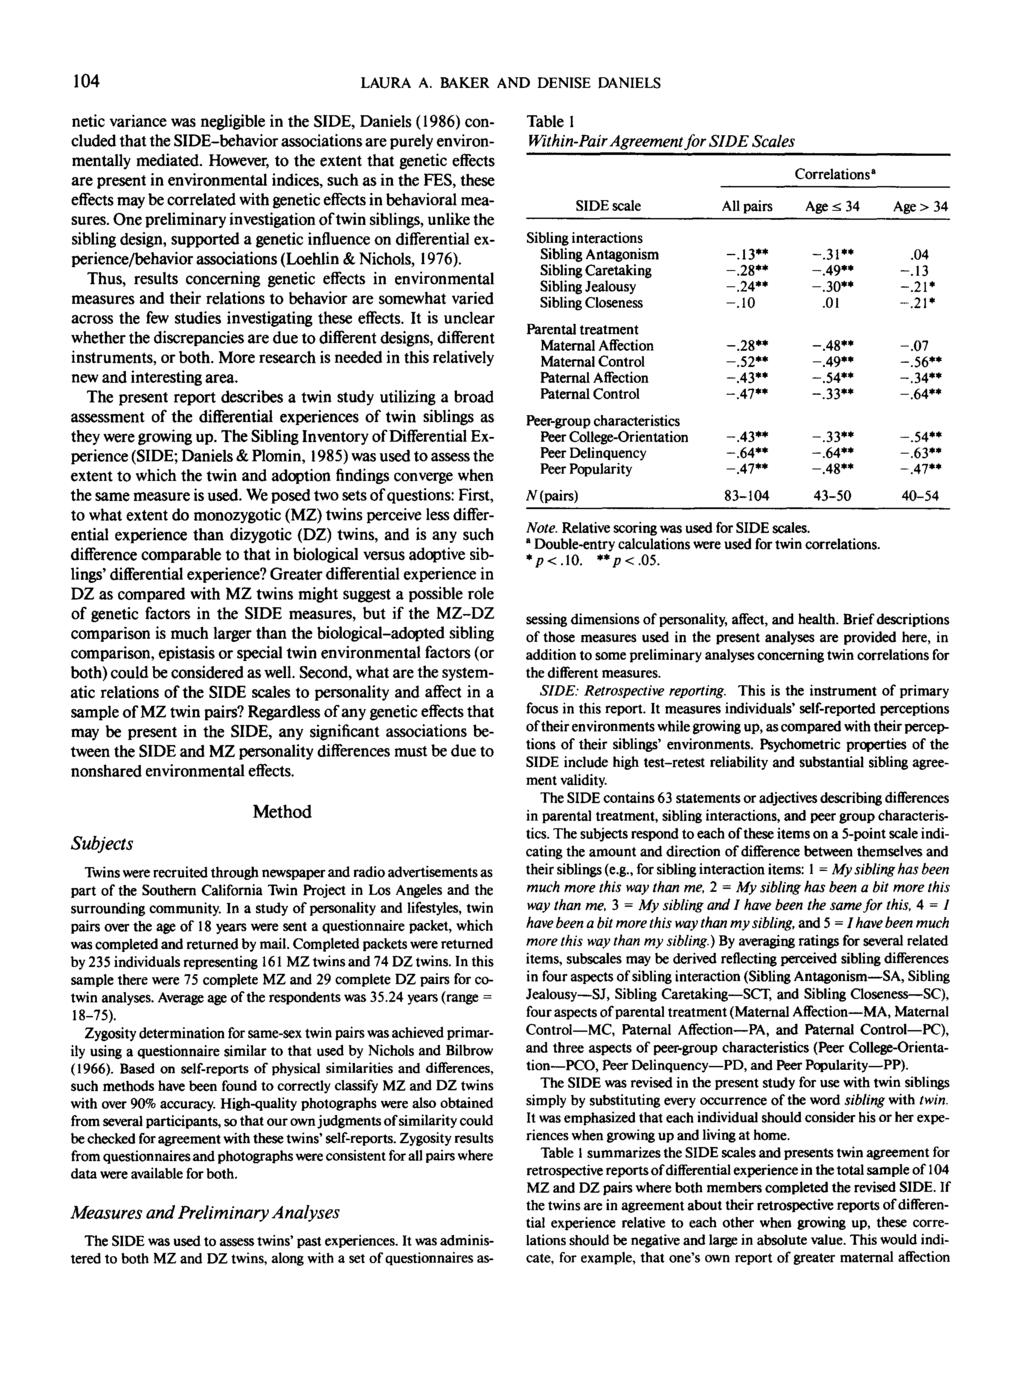 104 LAURA A. BAKER AND DENISE DANIELS netic variance was negligible in the SIDE, Daniels (1986) concluded that the SIDE-behavior associations are purely environmentally mediated.